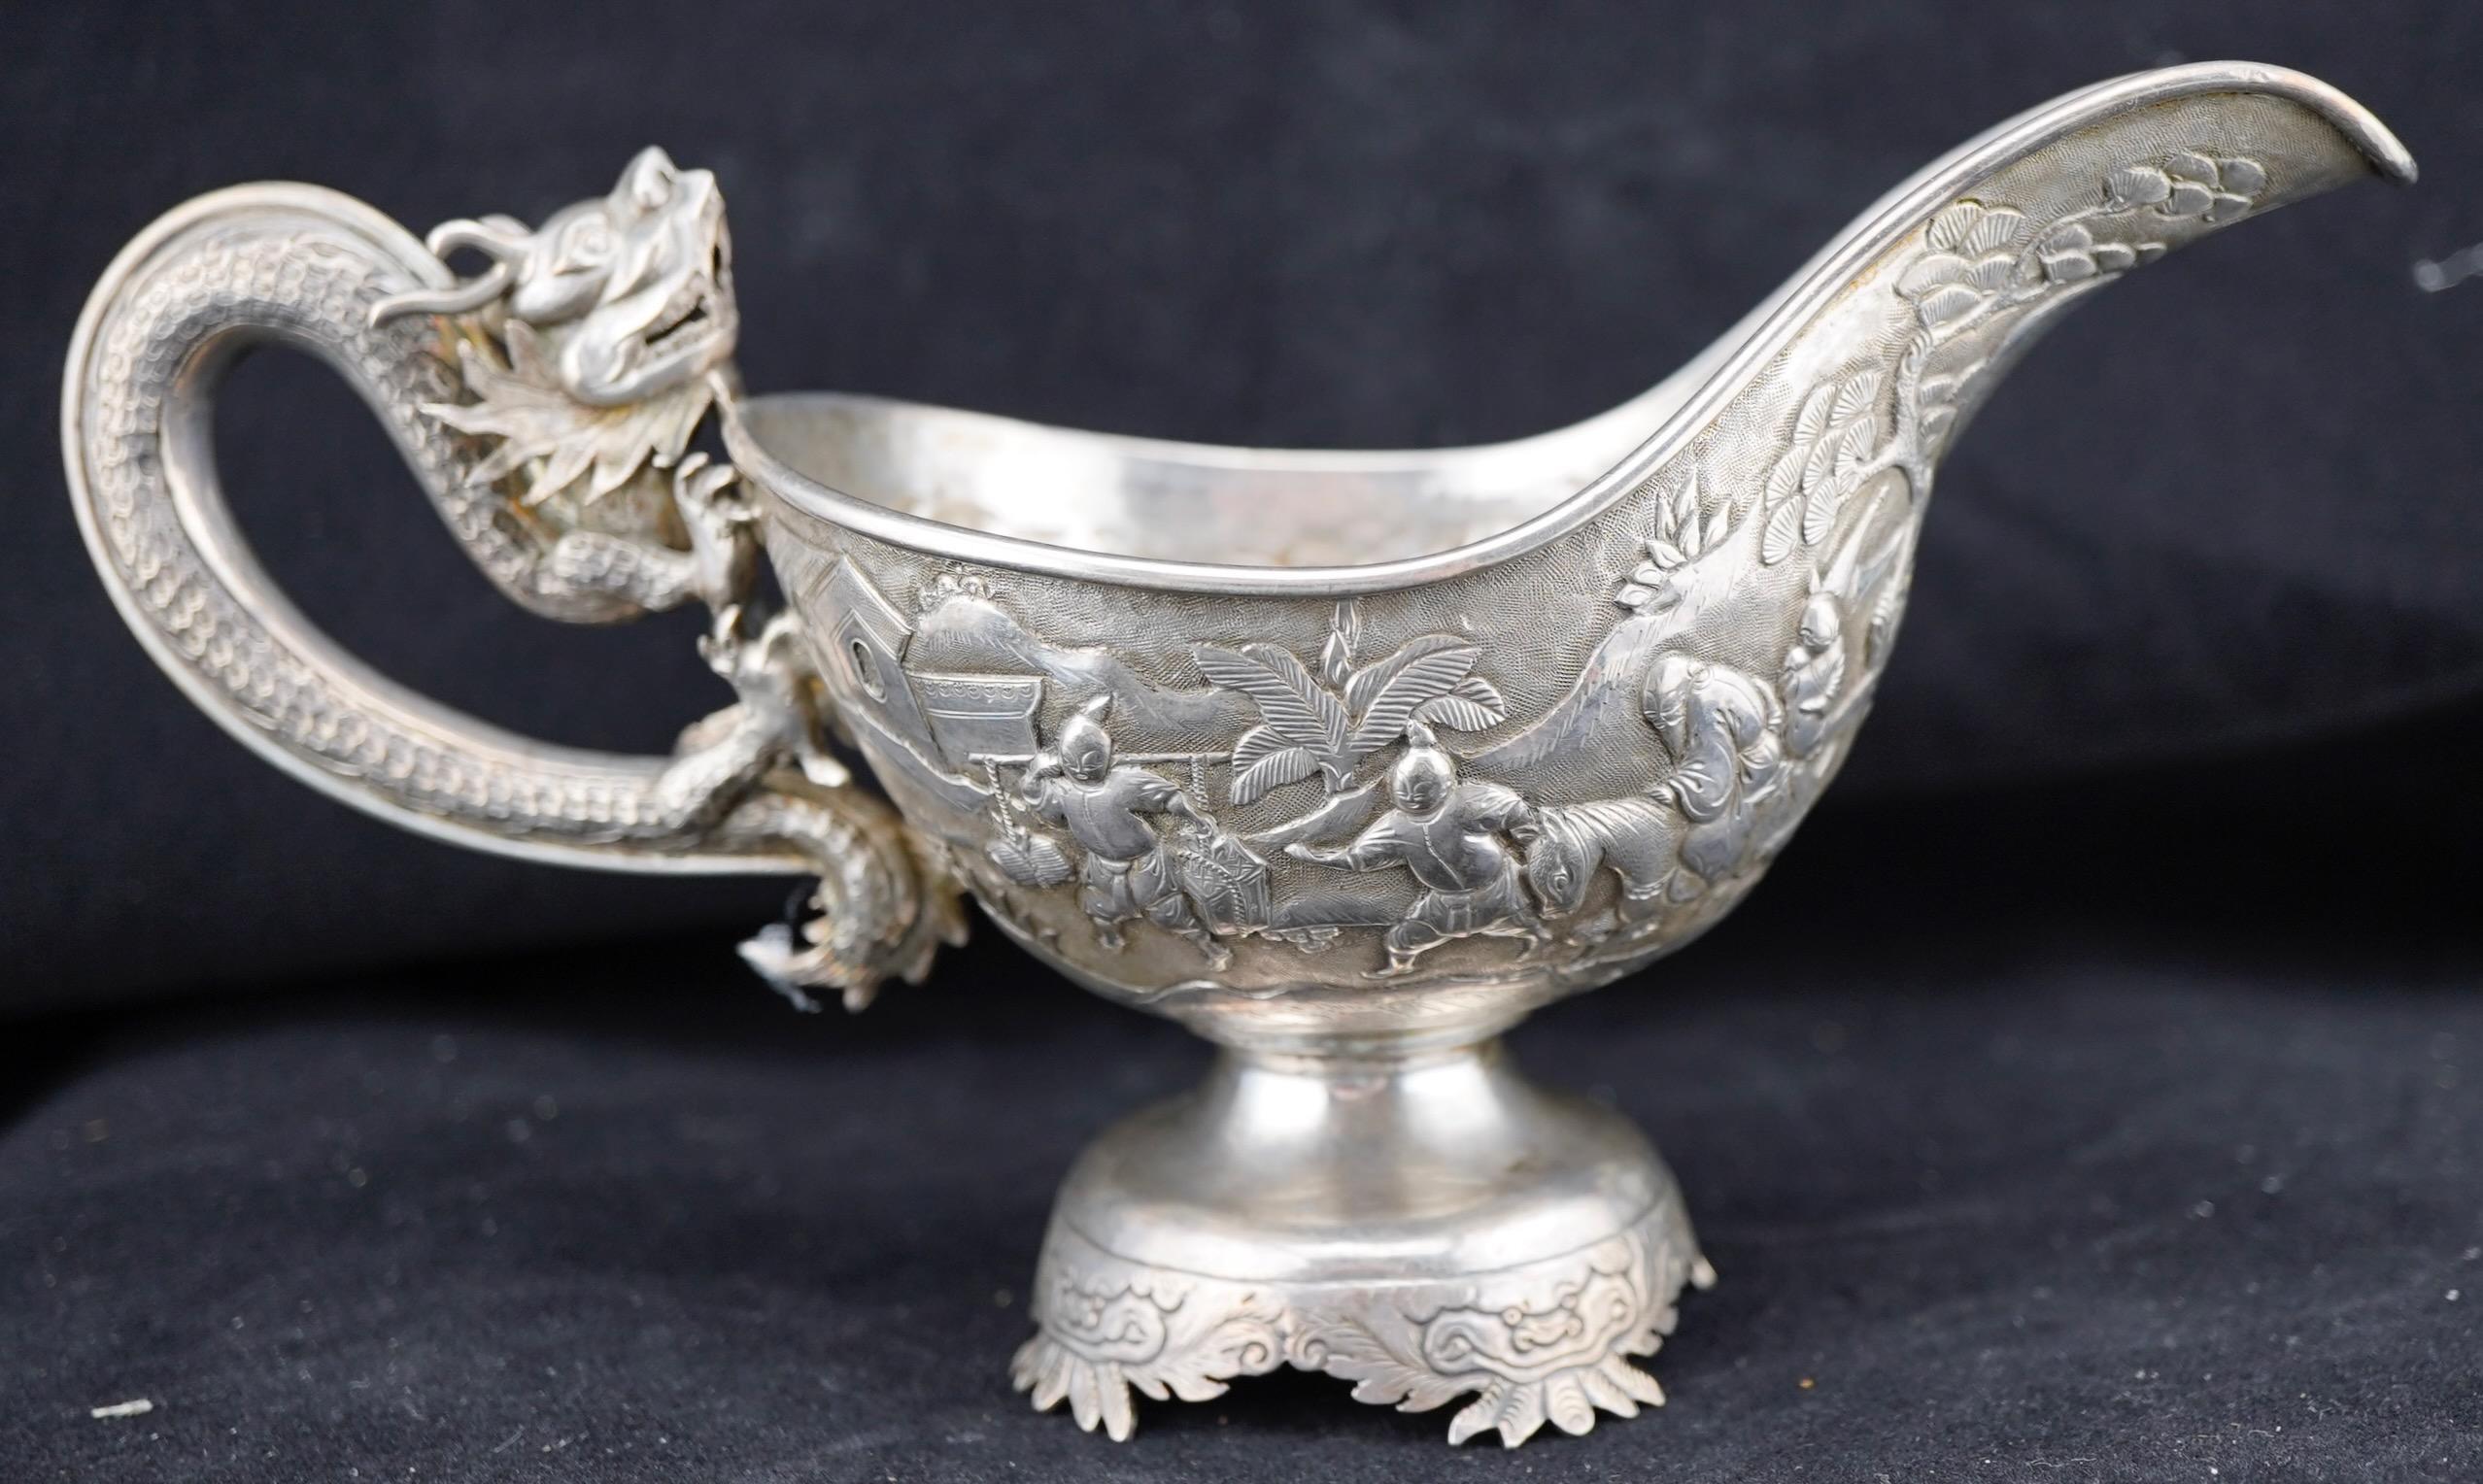 Chinese Export silver repousse sauce boat with dragon handles. Marked for Luen Wo.. Very fine decoration. 7 1/4